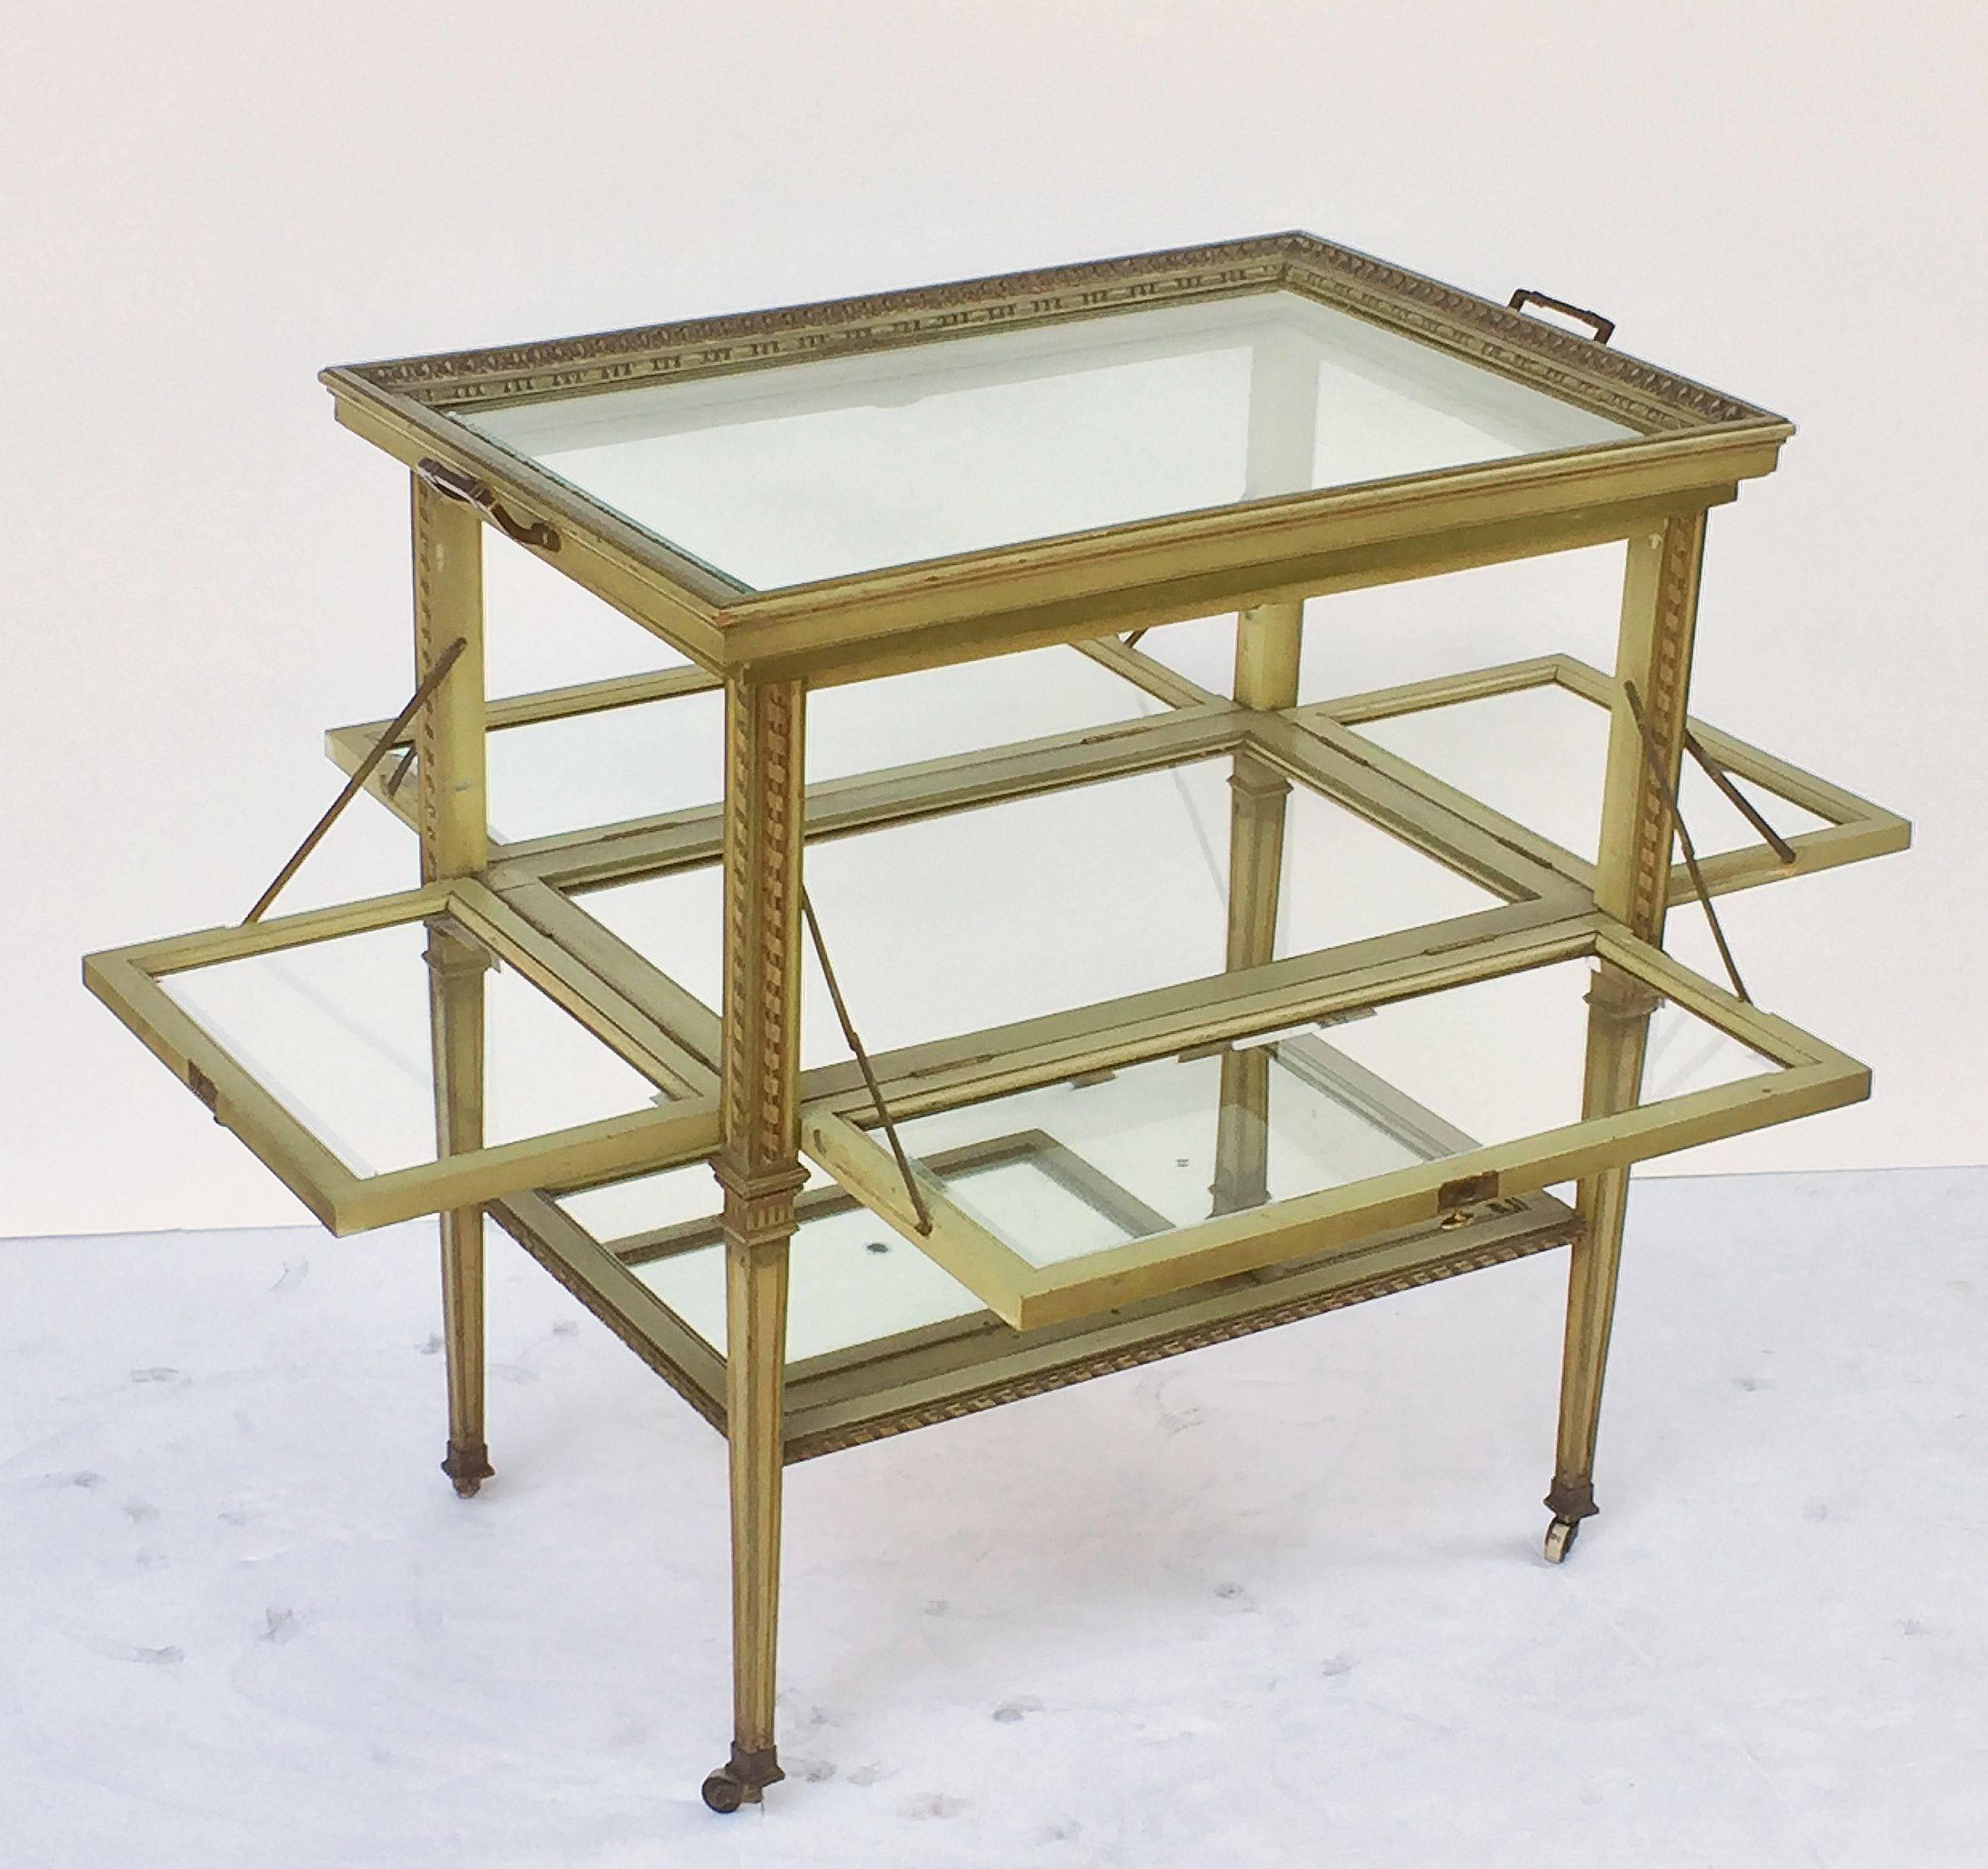 A fine Italian drinks cart or tea and coffee serving table of painted wood, featuring a large removable rectangular tray top with a moulded edge surrounding beveled glass, set upon a table base with a fitted glass top and bottom, with decorative